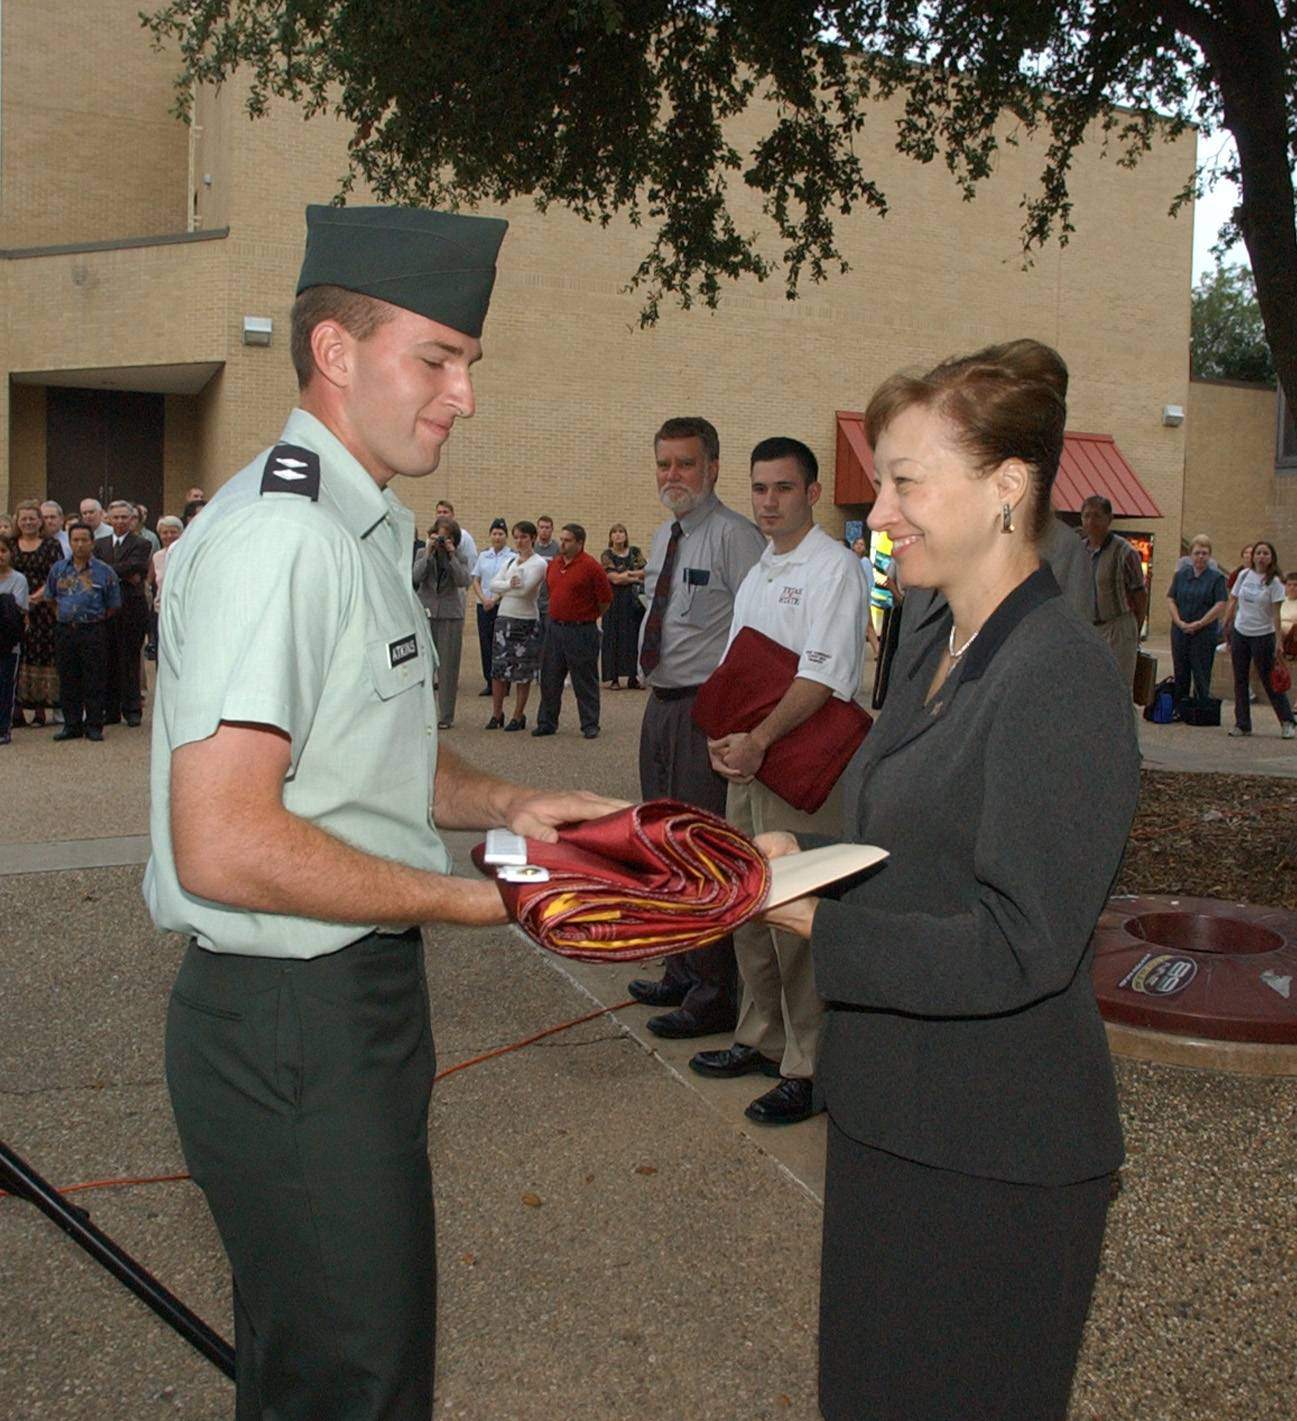 dr trauth handing flag to someone in military uniform